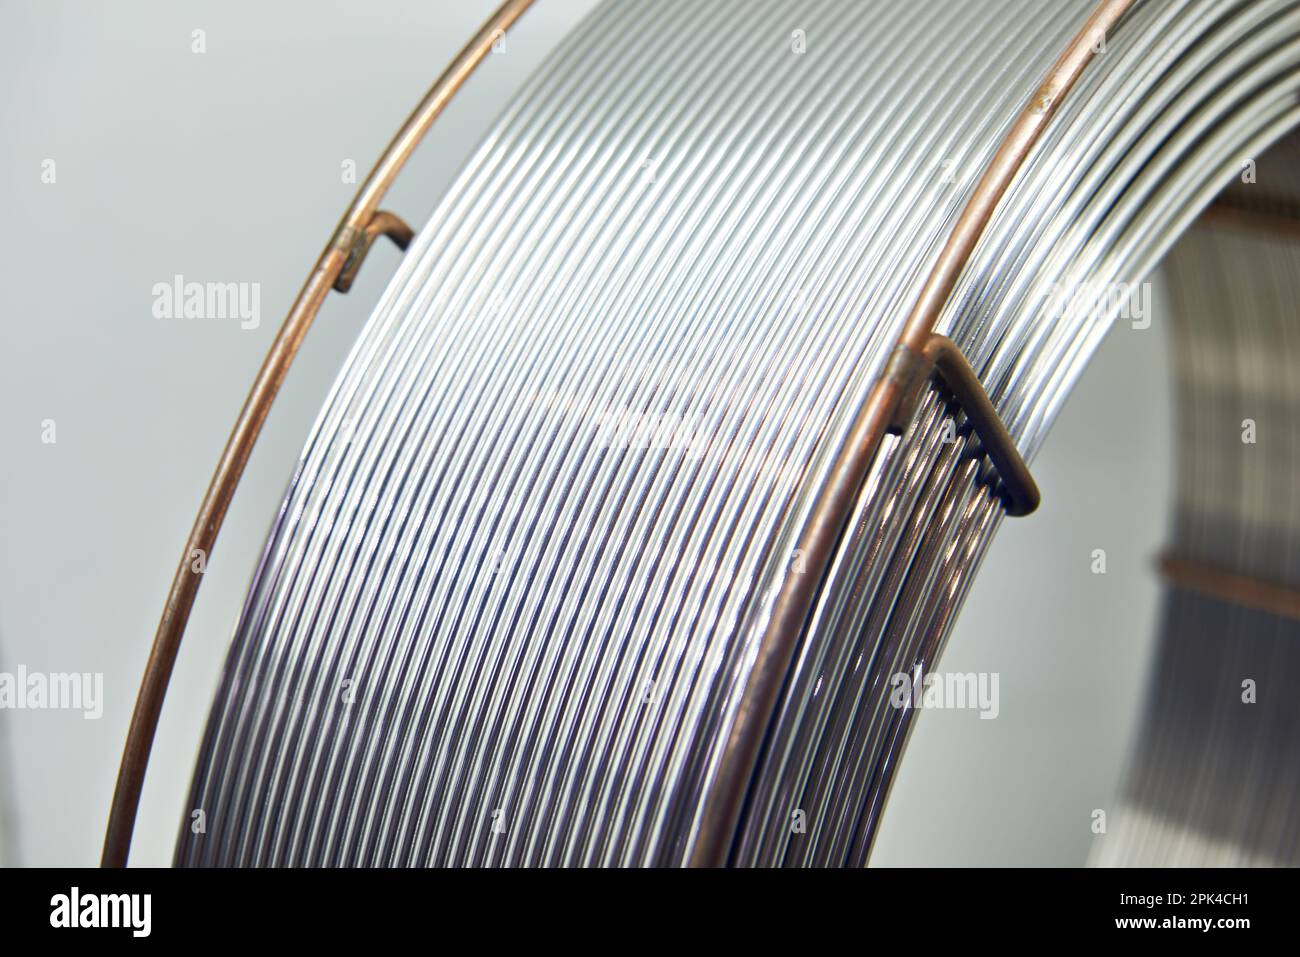 Aluminum wire in the coil Stock Photo